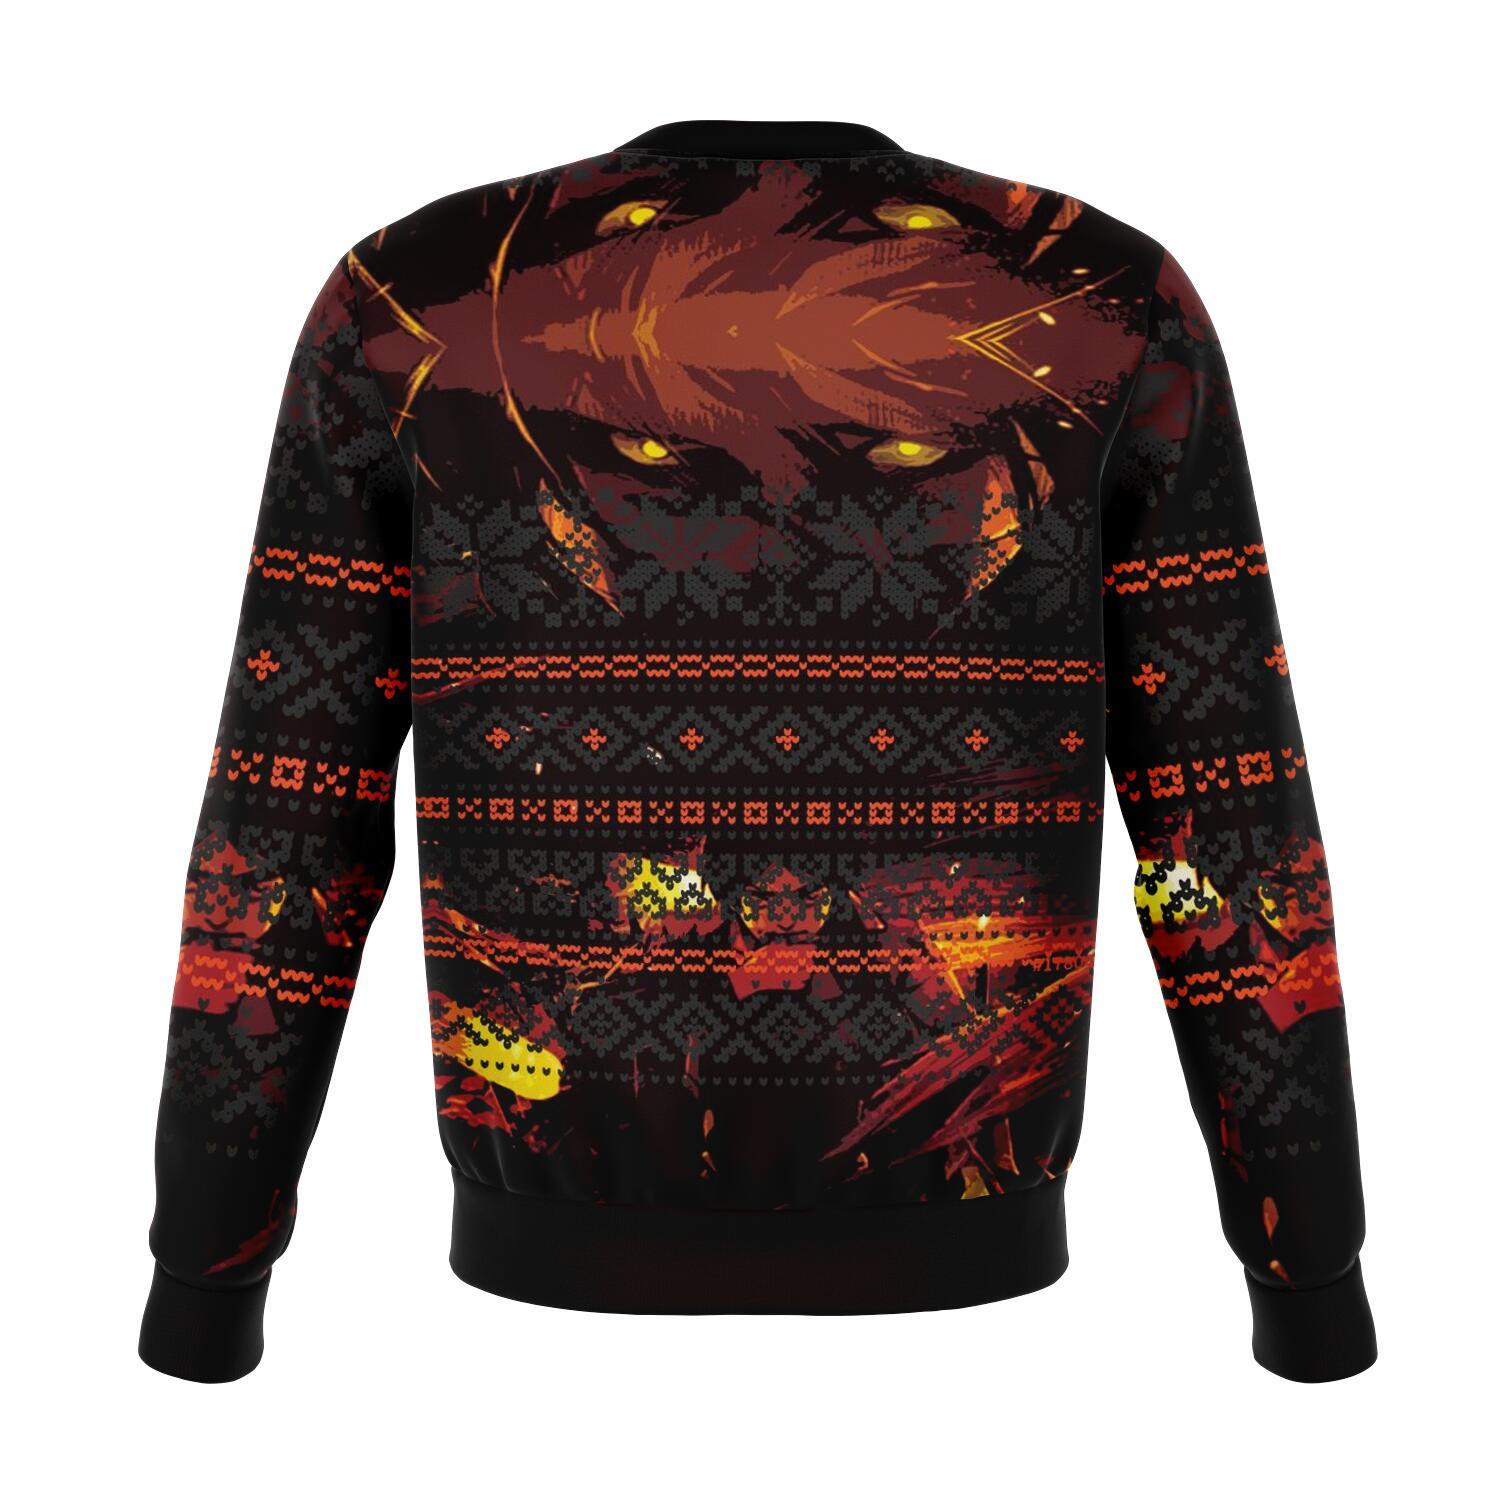 attack on titan 3d ugly christmas sweater 882946 - Attack On Titan Shop